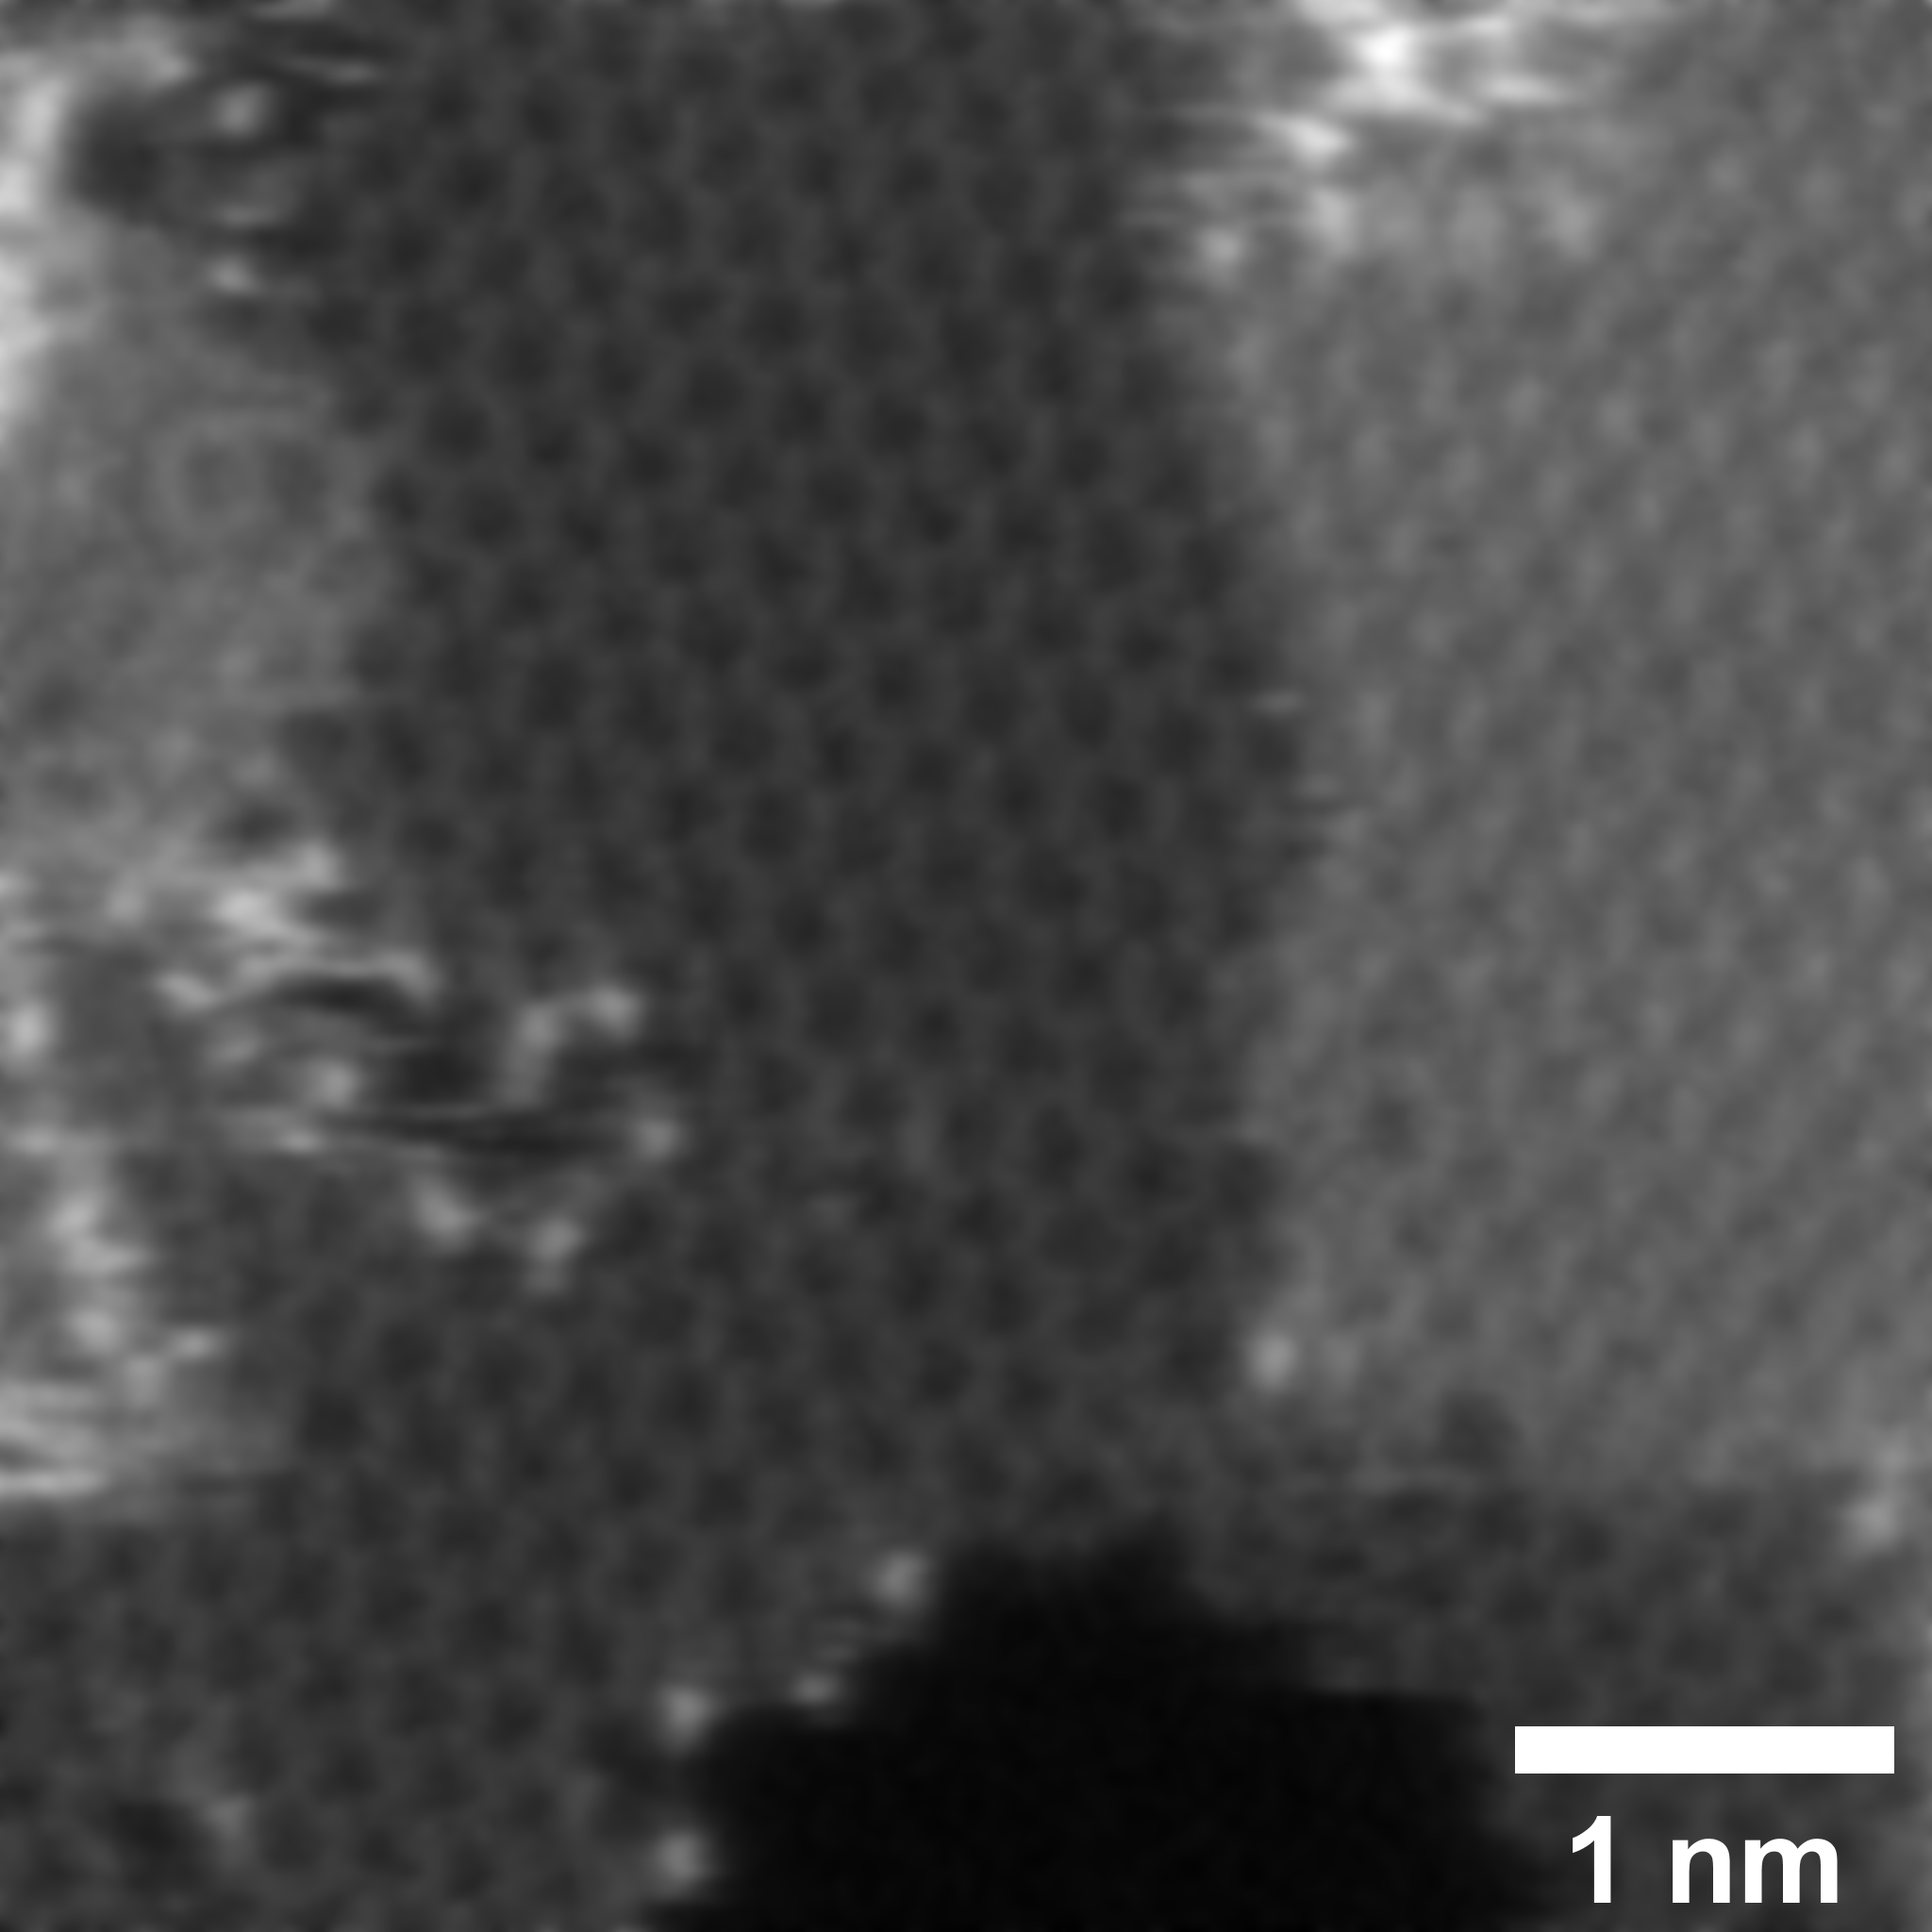 Atomic resolution transmission electron microscope image of doped graphene. The bright dots are sulphur dopant atoms embedded in the graphene lattice.<br/>(Image courtesy of L. Peng and X. Duan, UCLA)